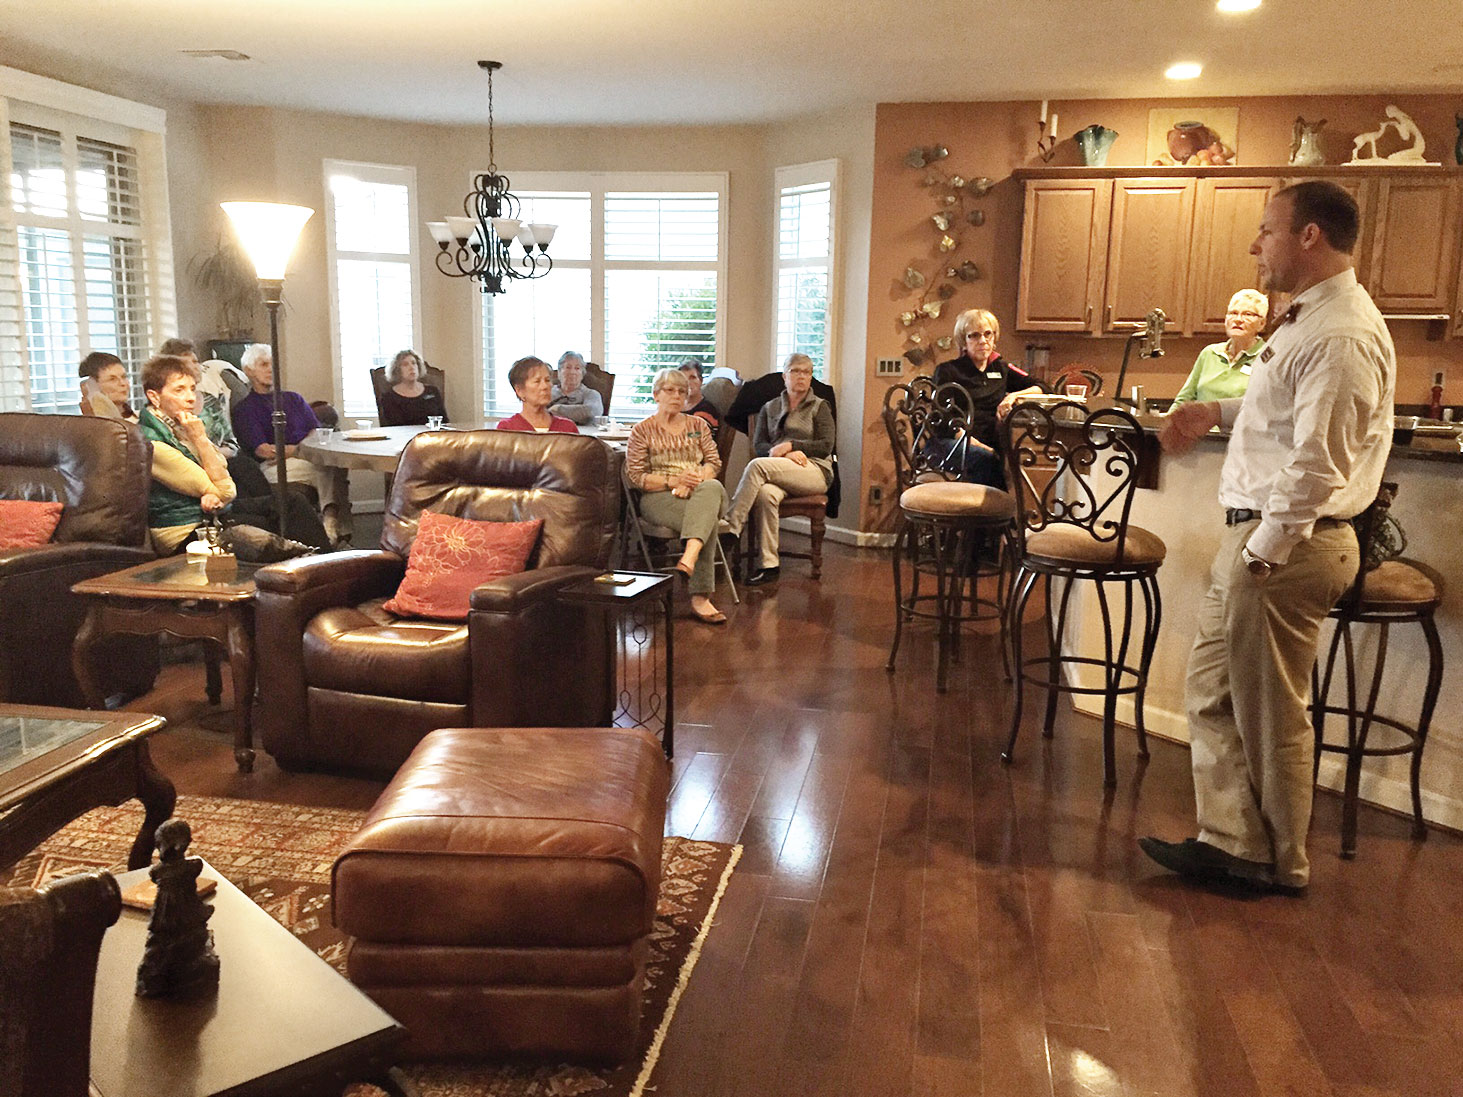 Nurses of Quail Creek meet periodically to hear guest speakers and enjoy dinner together. Here David Martin of Youth On Their Own (YOTO) presented information on children who don’t have a parent representative in their lives.